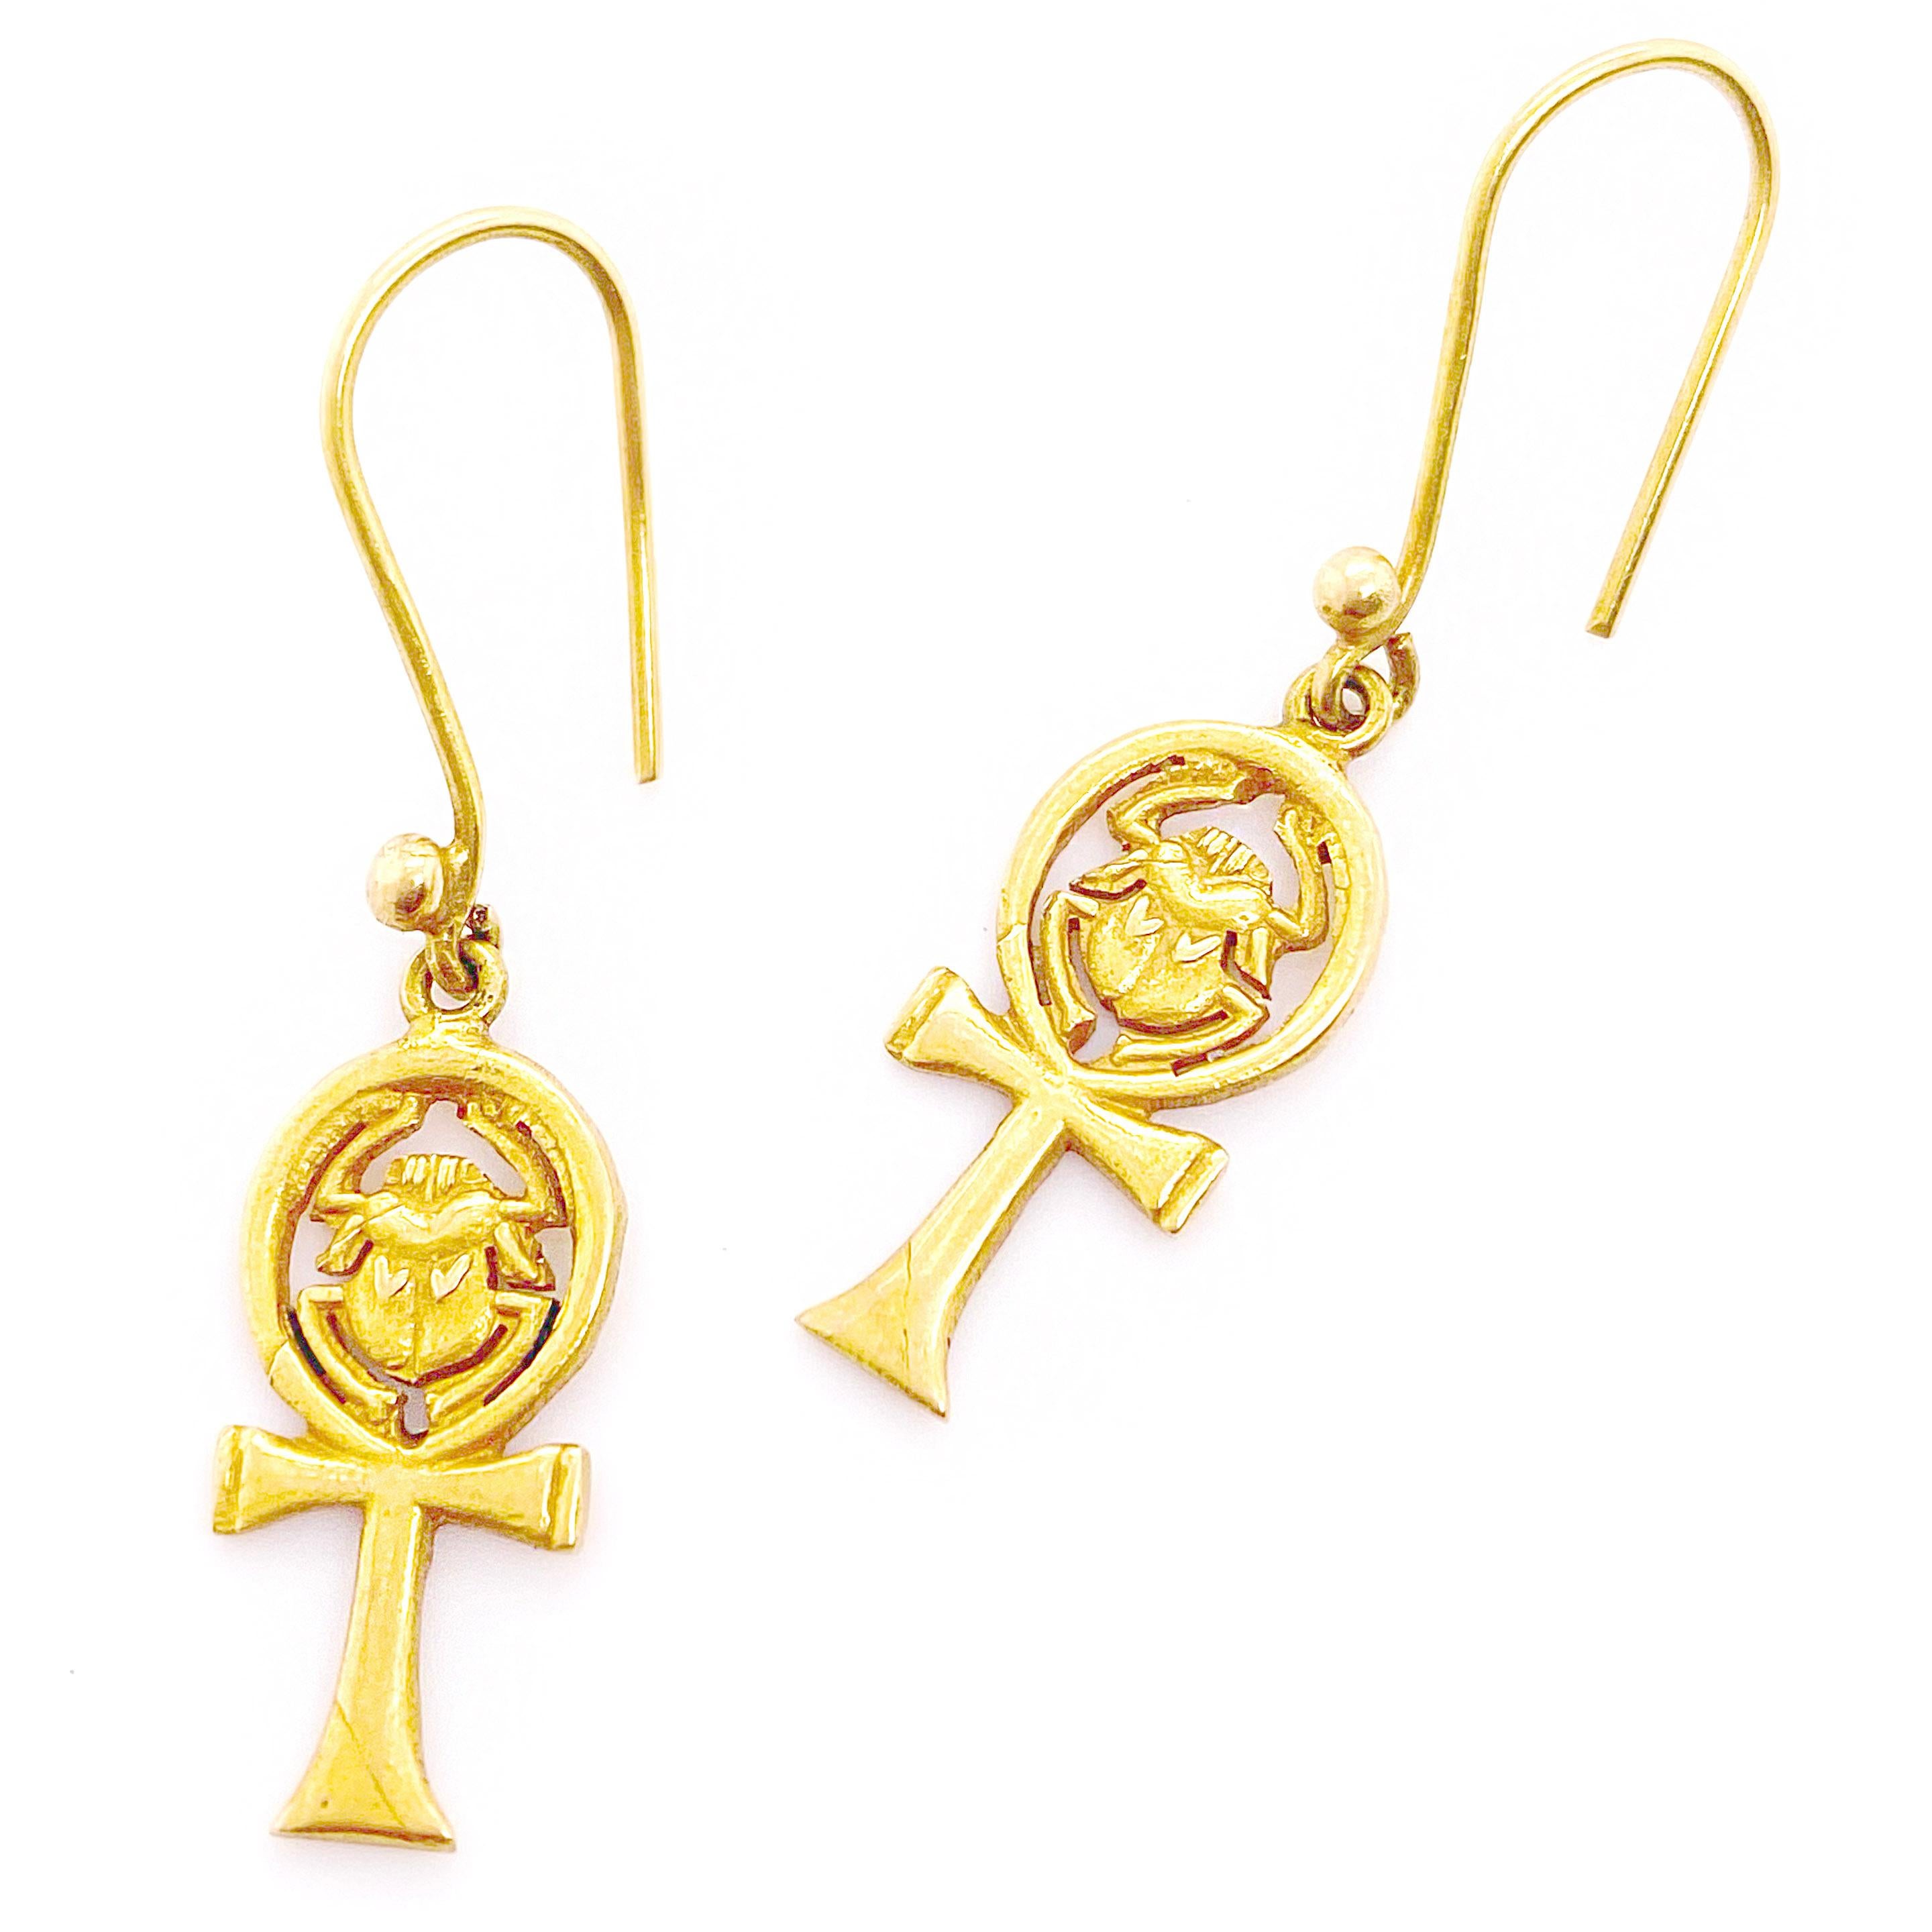 22 Karat Gold Earrings are better than any 14 karat gold you might find. These unique “Ankh” earrings represent the Ancient Egypt symbol. Ankh represents the key of life or the key of the Nile representative of eternal life in Ancient Egypt. The